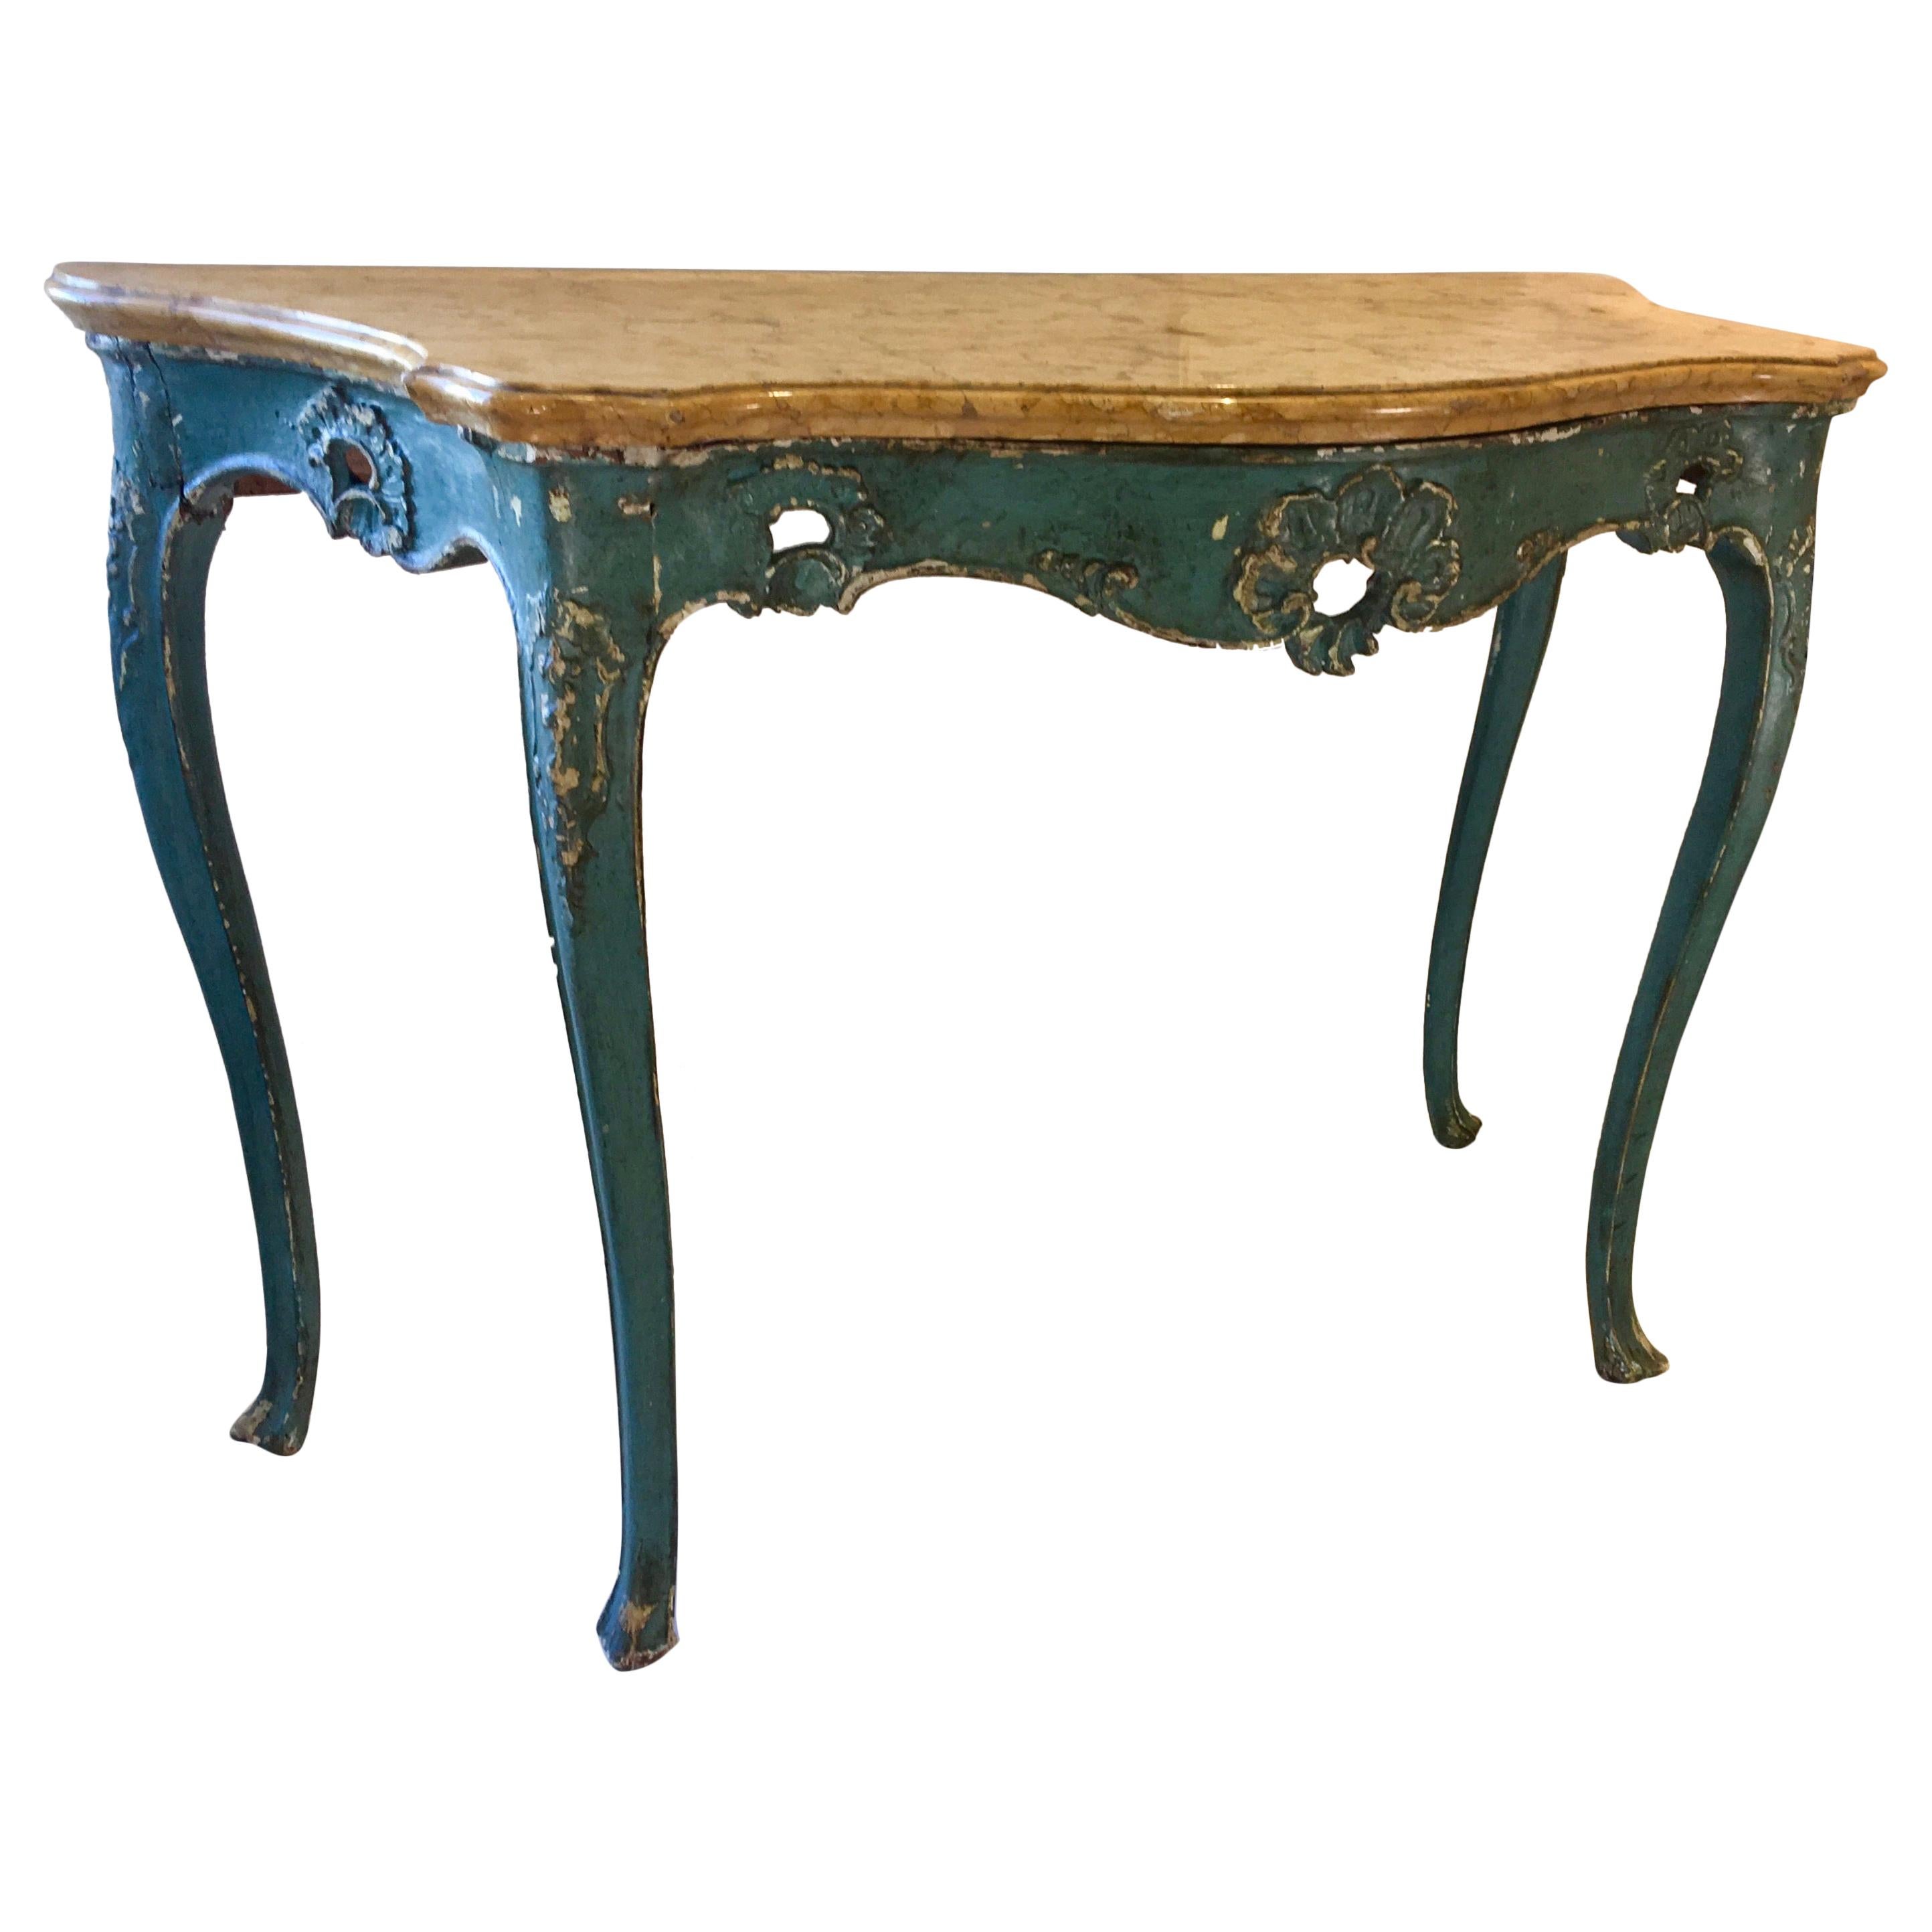 Venetian Polychrome Console Table with Original Marble Top, 18th Century